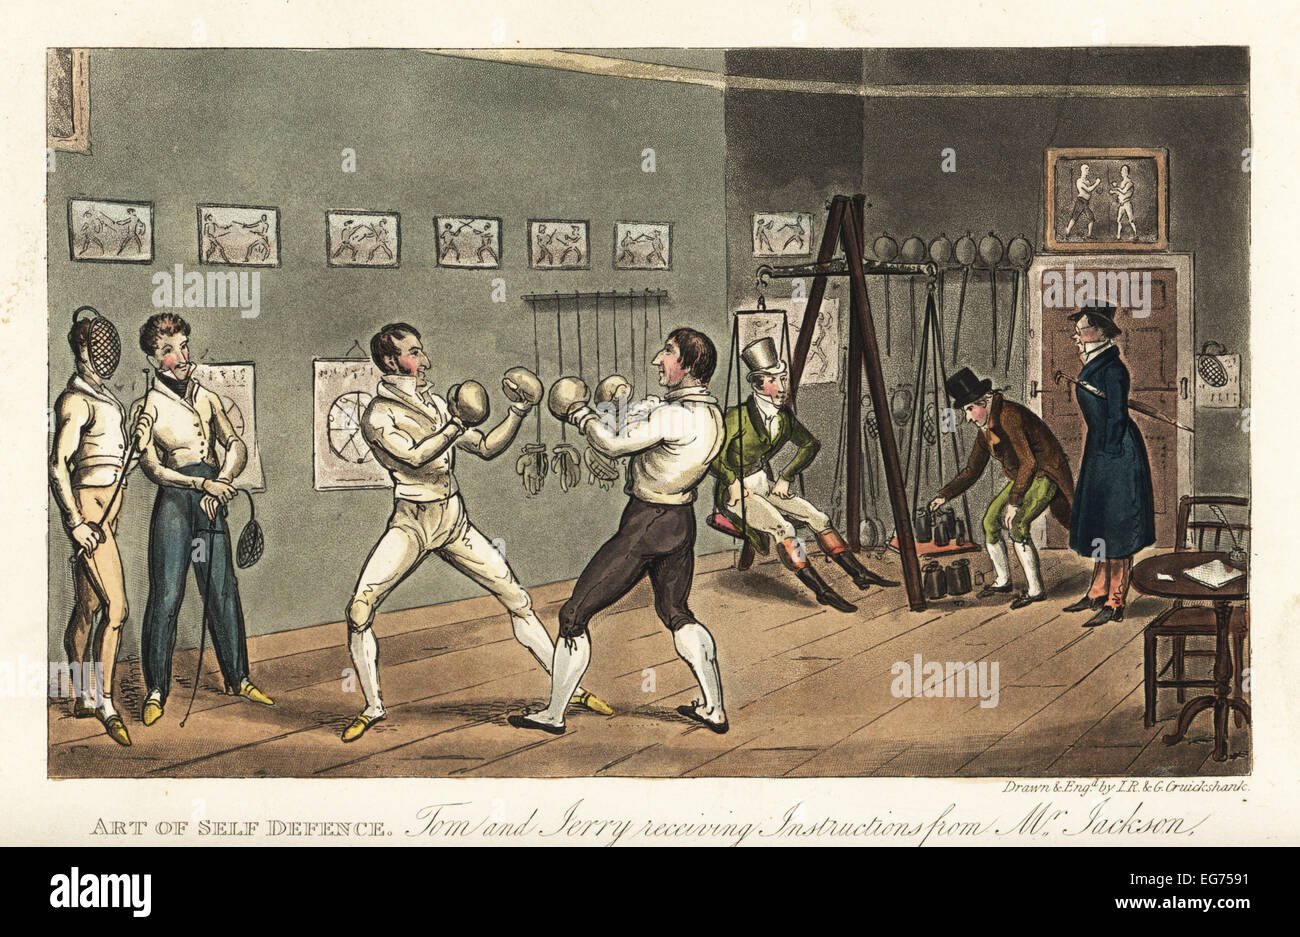 English dandy Tom taking a boxing lesson from famous boxer Gentleman John Jackson, while Jerry is weighed on a swing scale. Tom and Jerry receiving instruction from Mr. Jackson at his rooms in Bond Street. Stock Photo